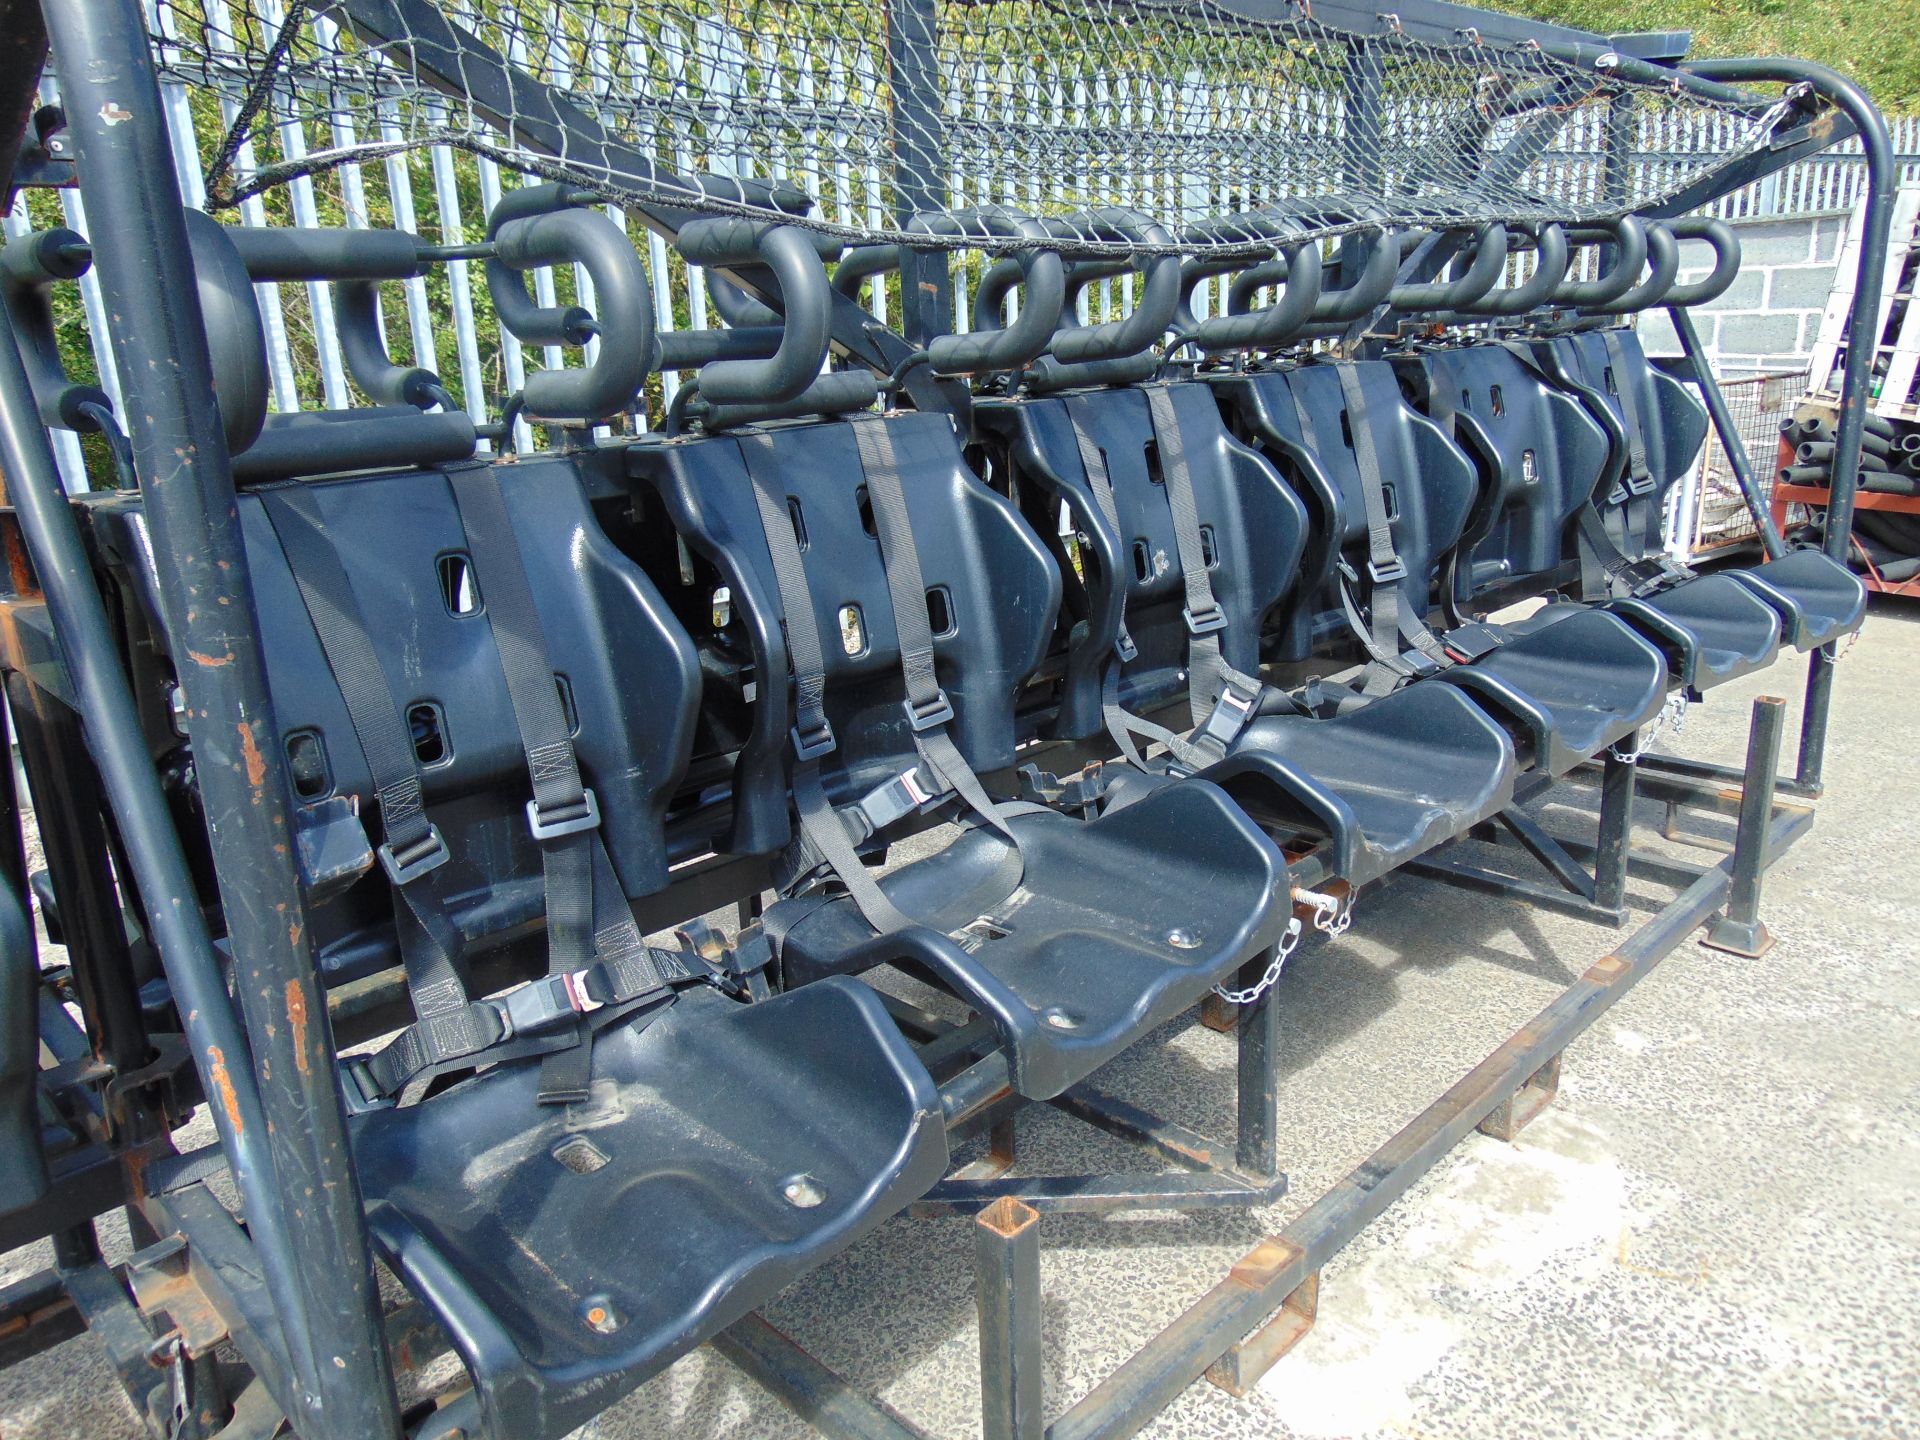 14 Man Security Seat suitable for Leyland Dafs, Bedfords etc - Image 9 of 9